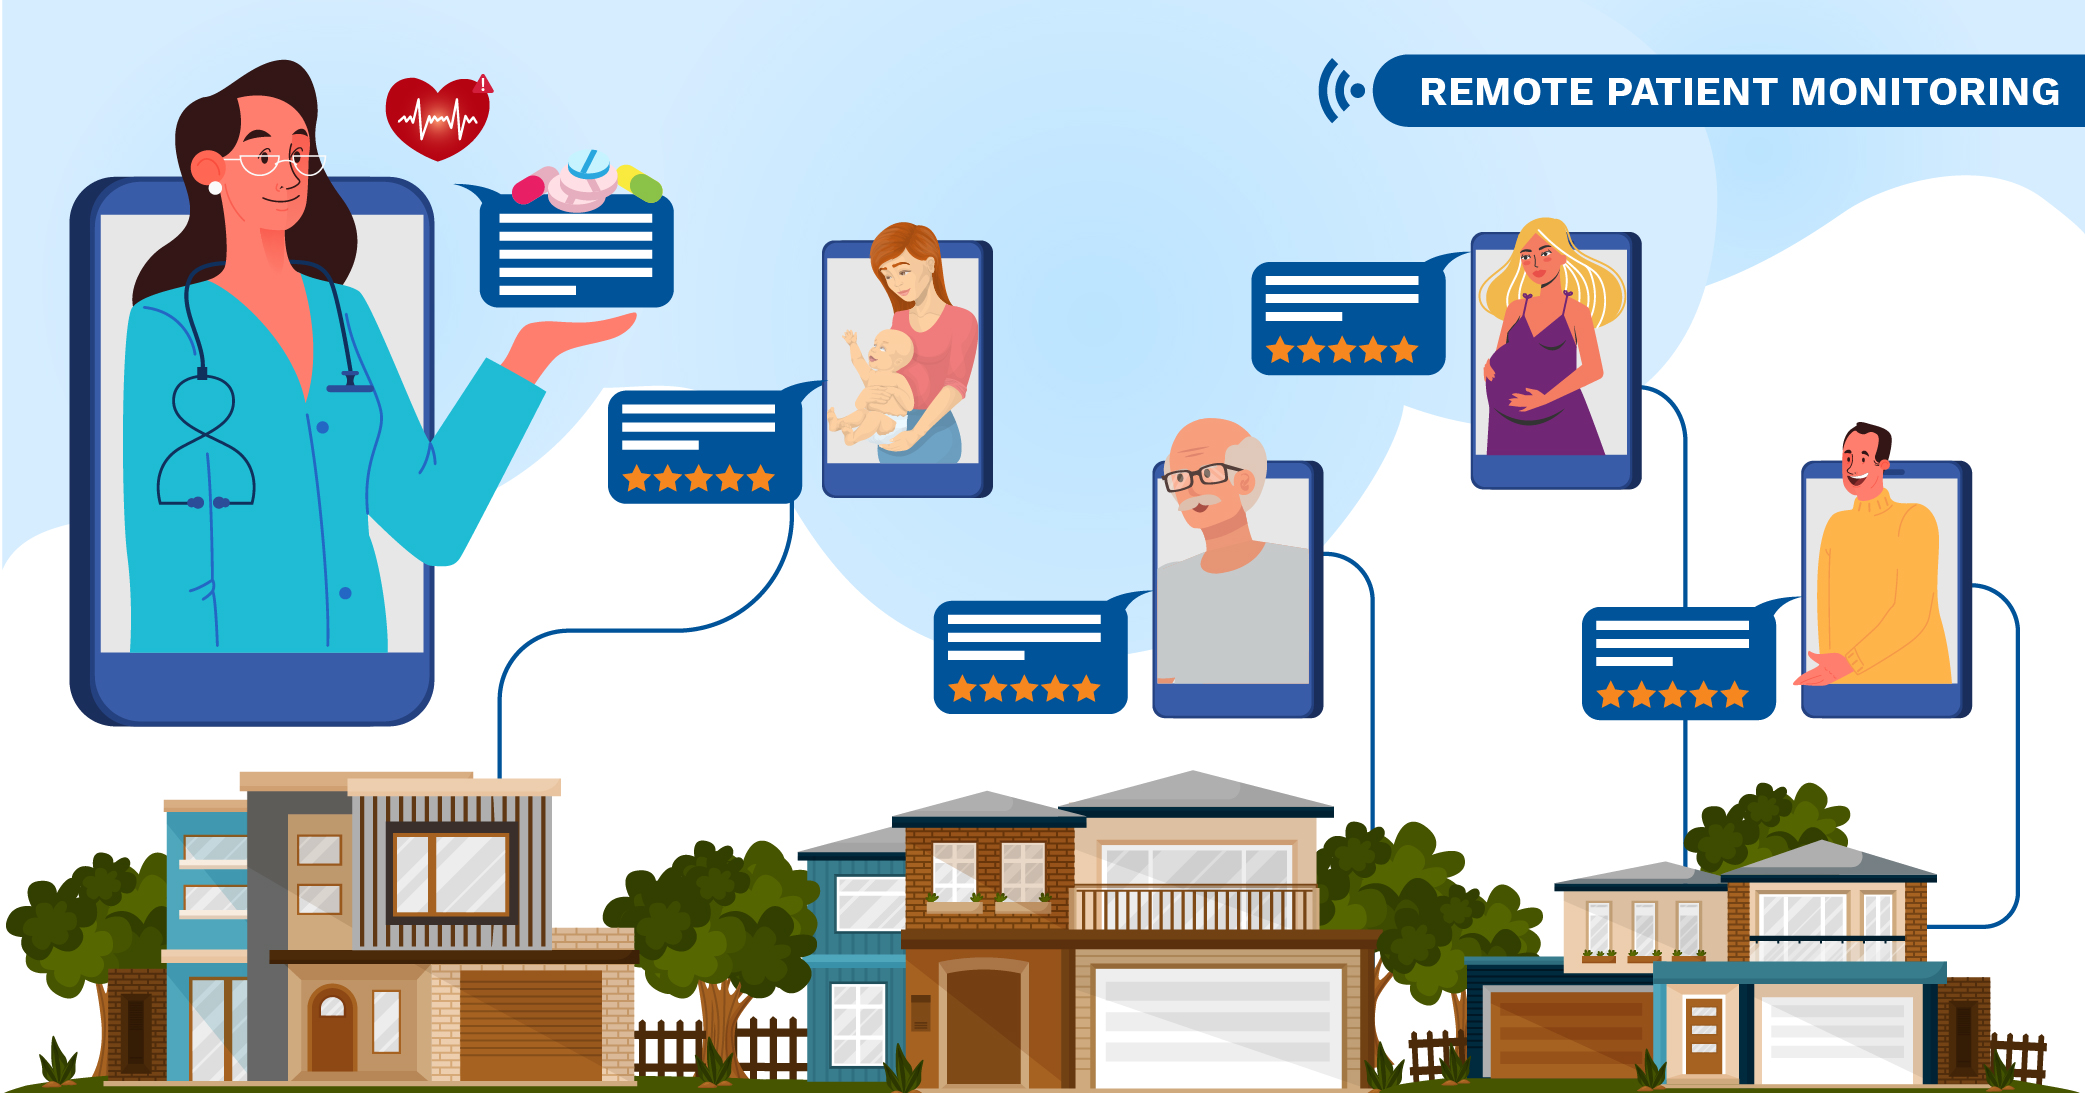 Remote patient monitoring - Infographic